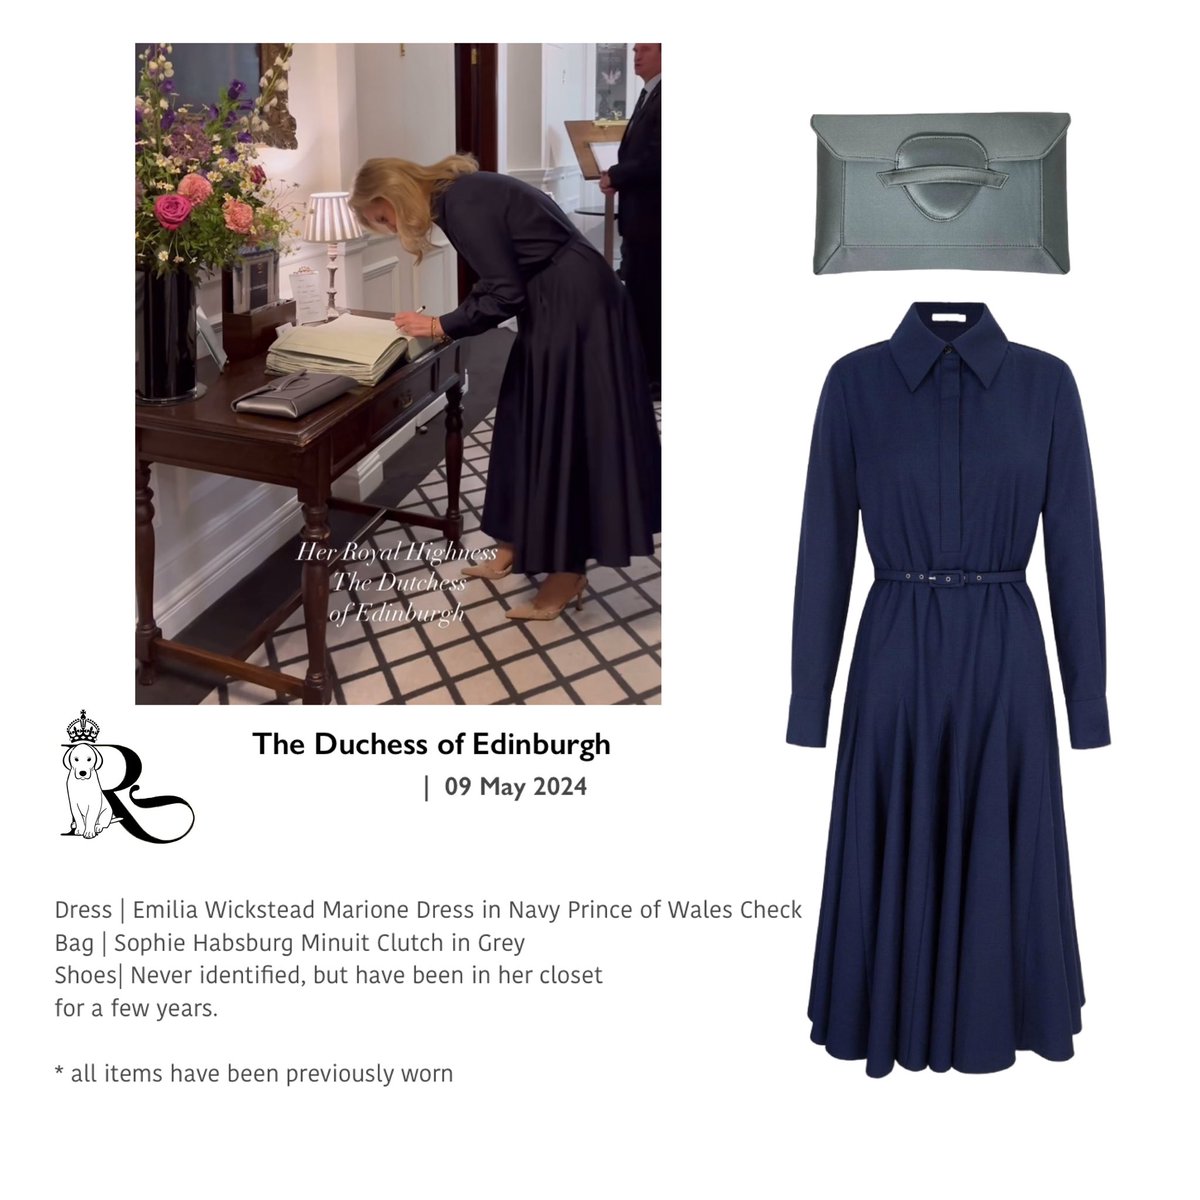 Thank you Marianna

Here are the details for The Duchess of Edinburgh’s outfit

#TheDuchessofEdinburgh #SuperSophie